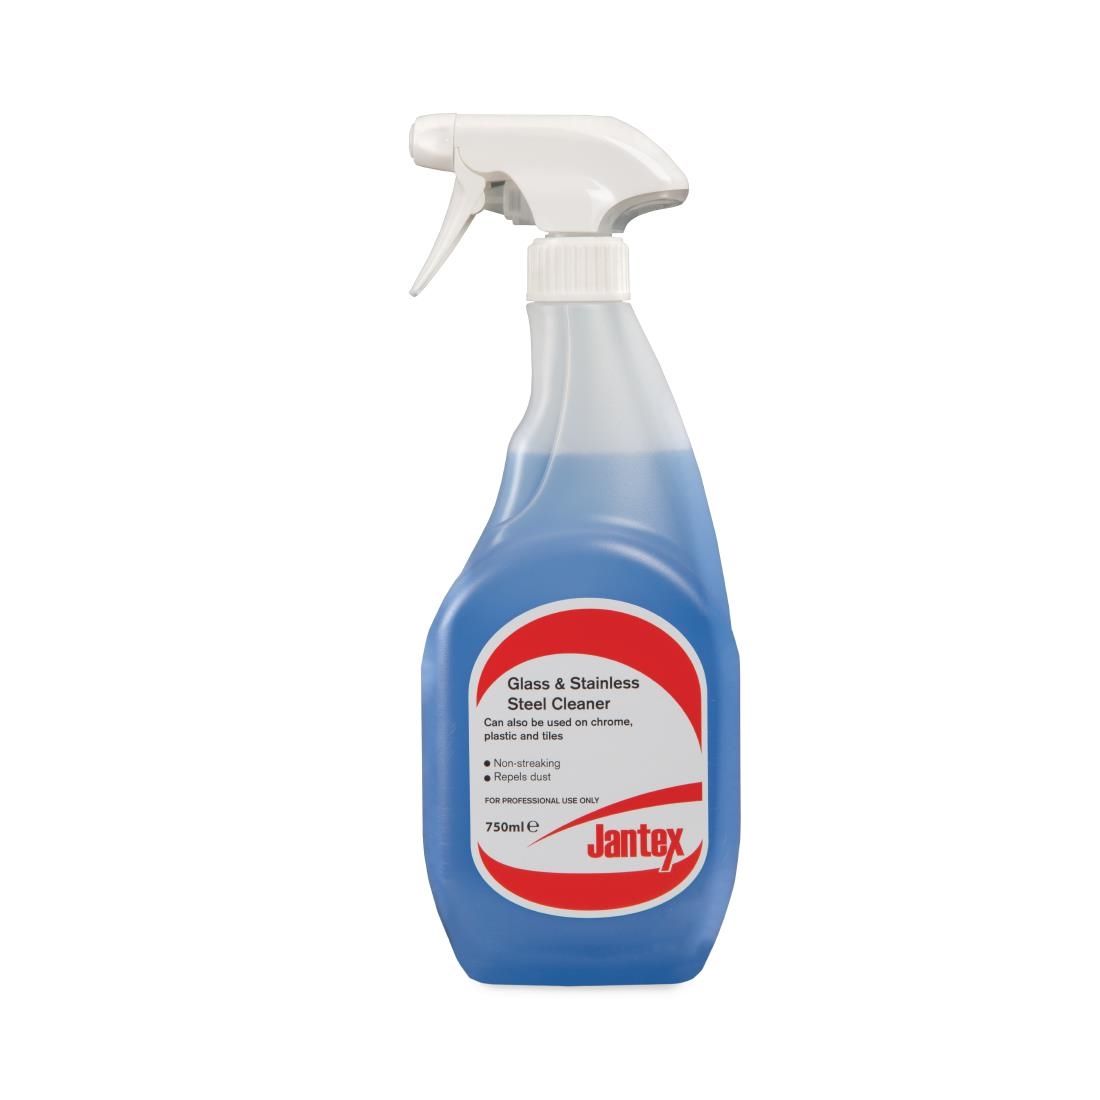 Jantex Glass and Stainless Steel Cleaner Ready To Use 750ml (Single Pack) JD Catering Equipment Solutions Ltd